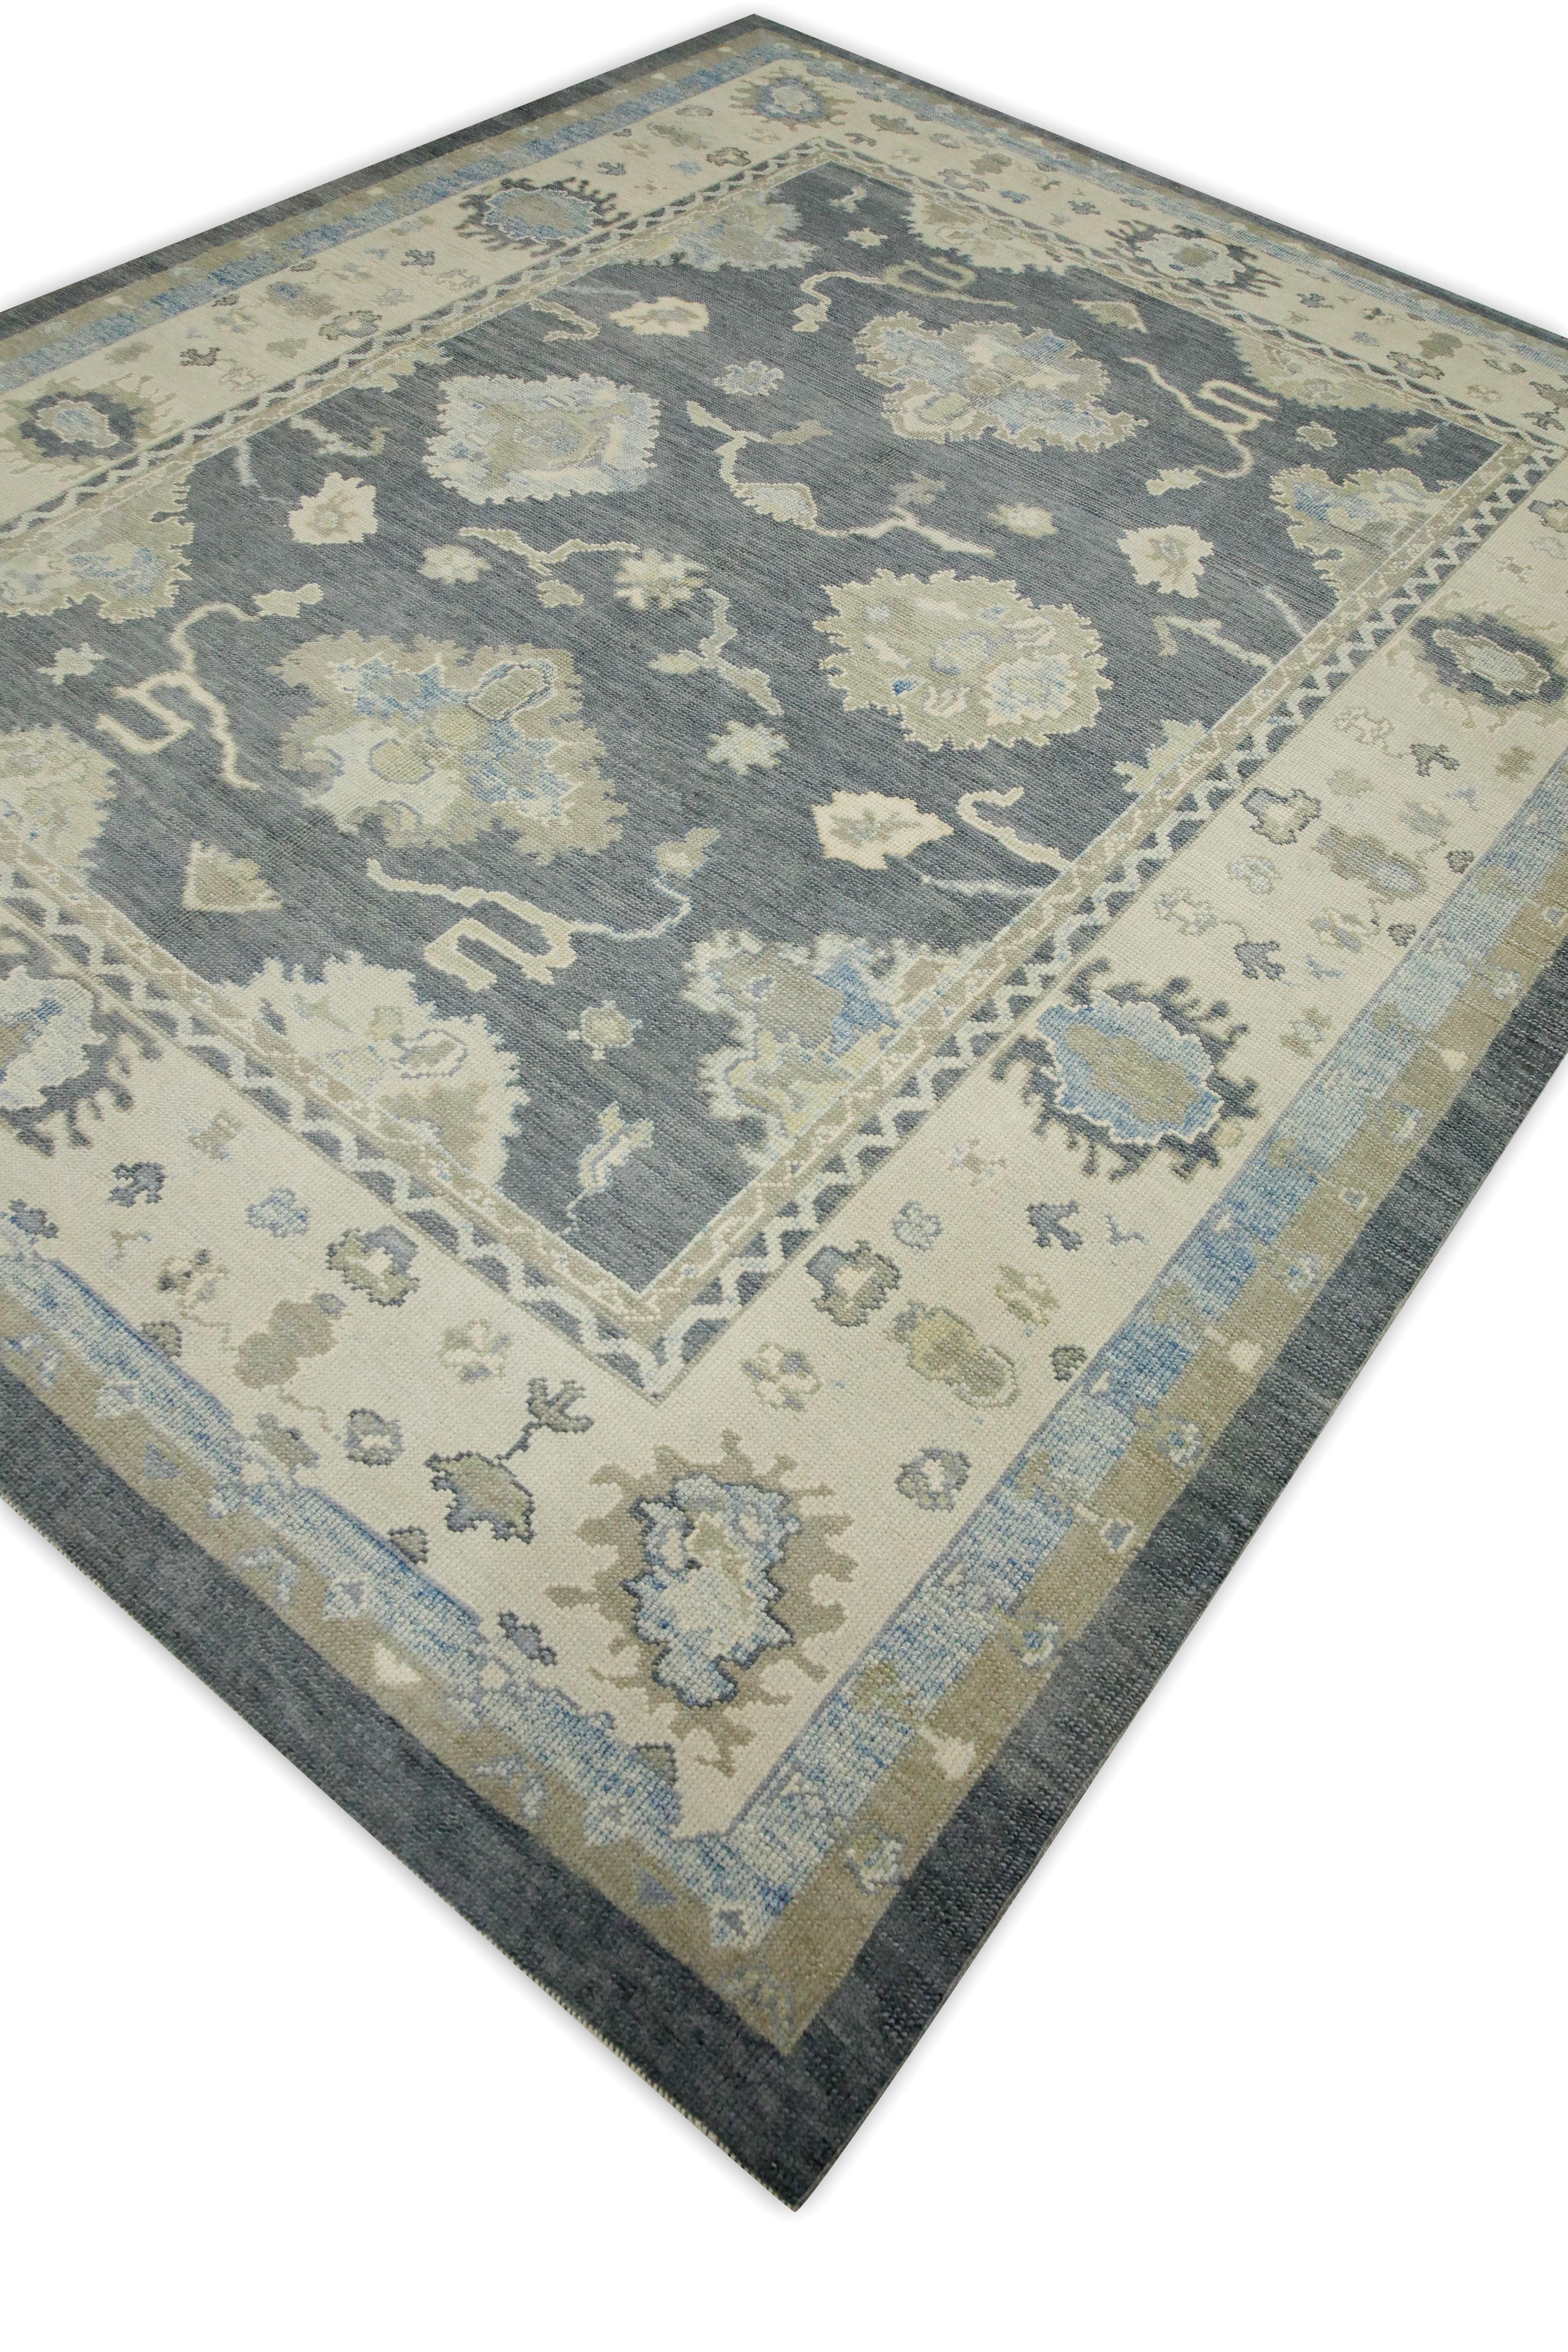 Contemporary Gray & Blue Floral Design Handwoven Wool Turkish Oushak Rug 8'3